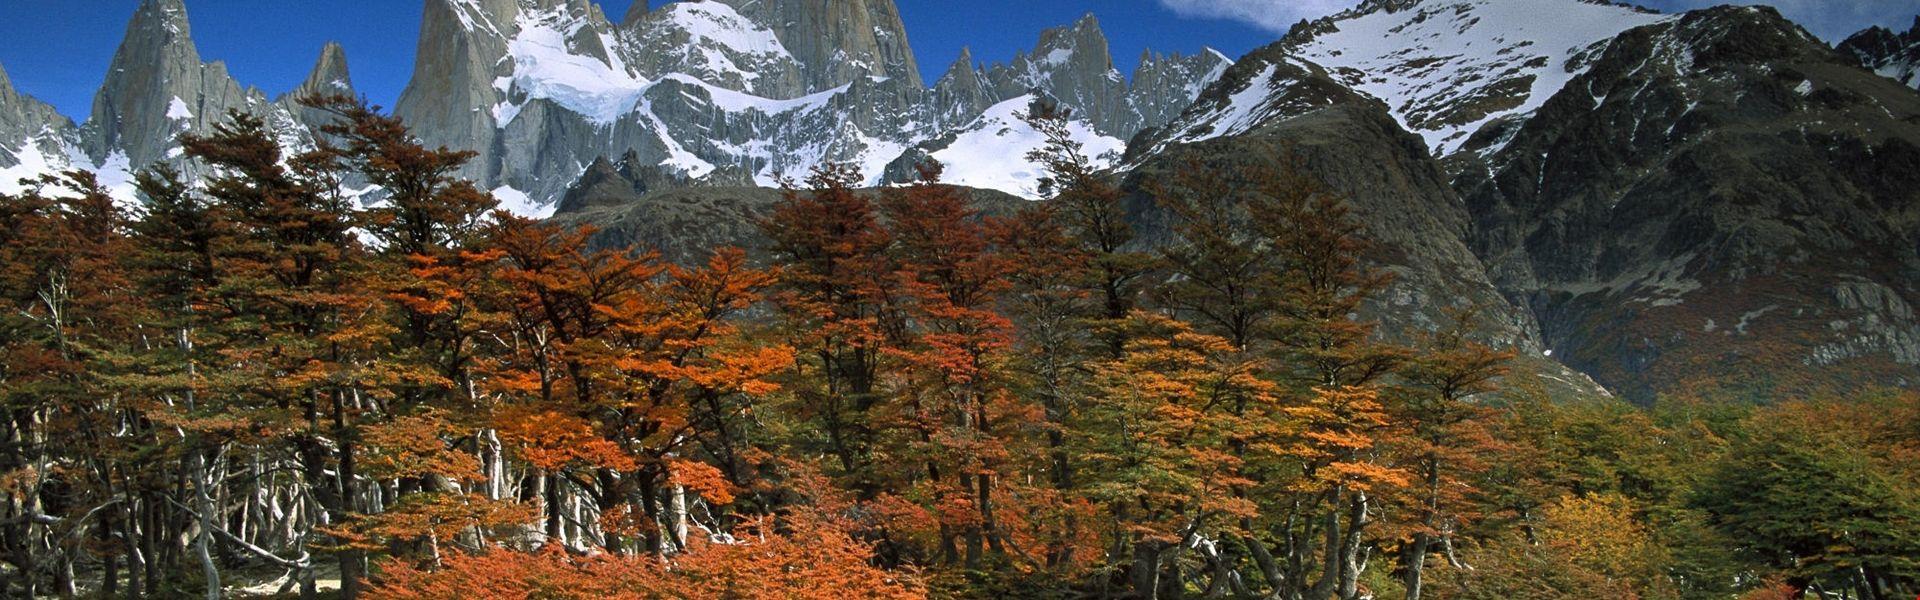 2k Fitzroy And Beech Trees In Autumn Los Glaciares National Park